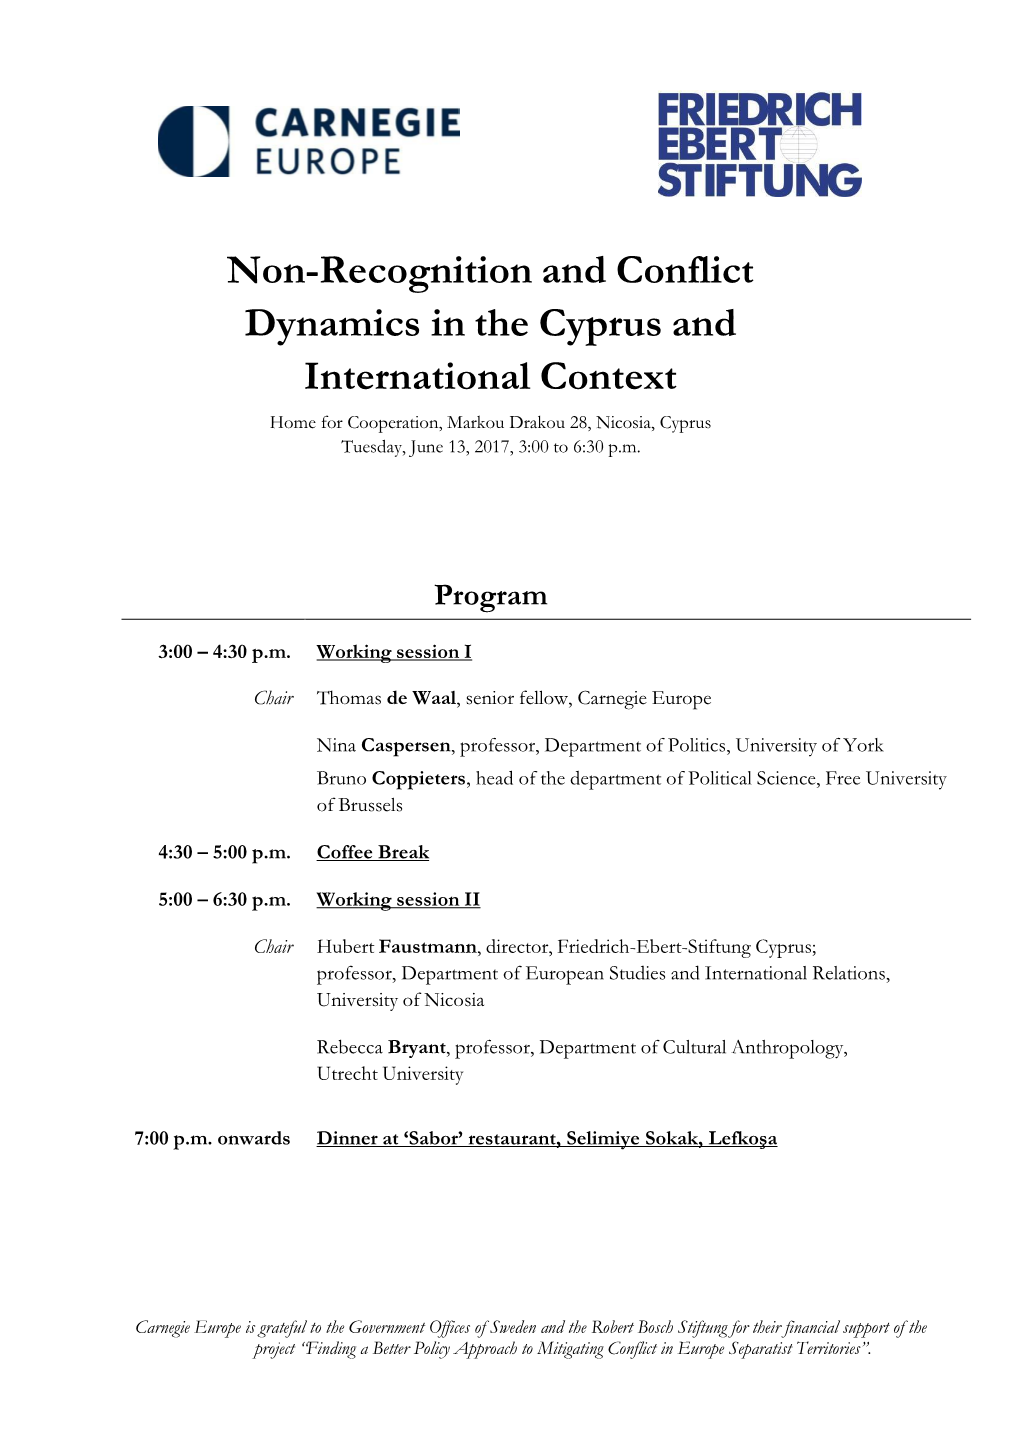 Non-Recognition and Conflict Dynamics in the Cyprus And